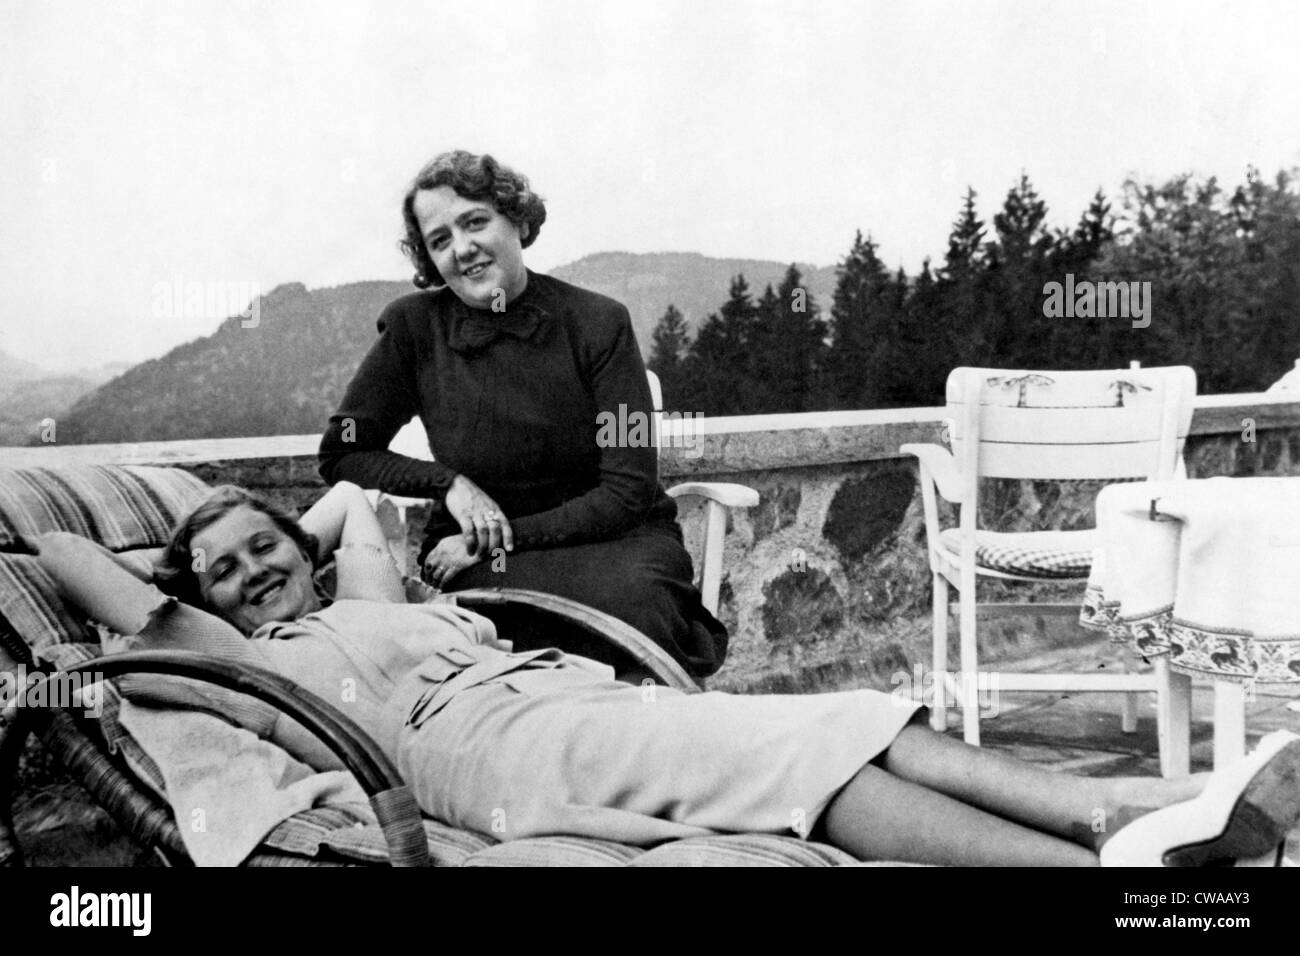 Eva Braun, girlfriend of Adolf Hitler and Mrs. Morell, wife of Hitler's personal physician at the Berghof. ca. 1945. Courtesy: Stock Photo